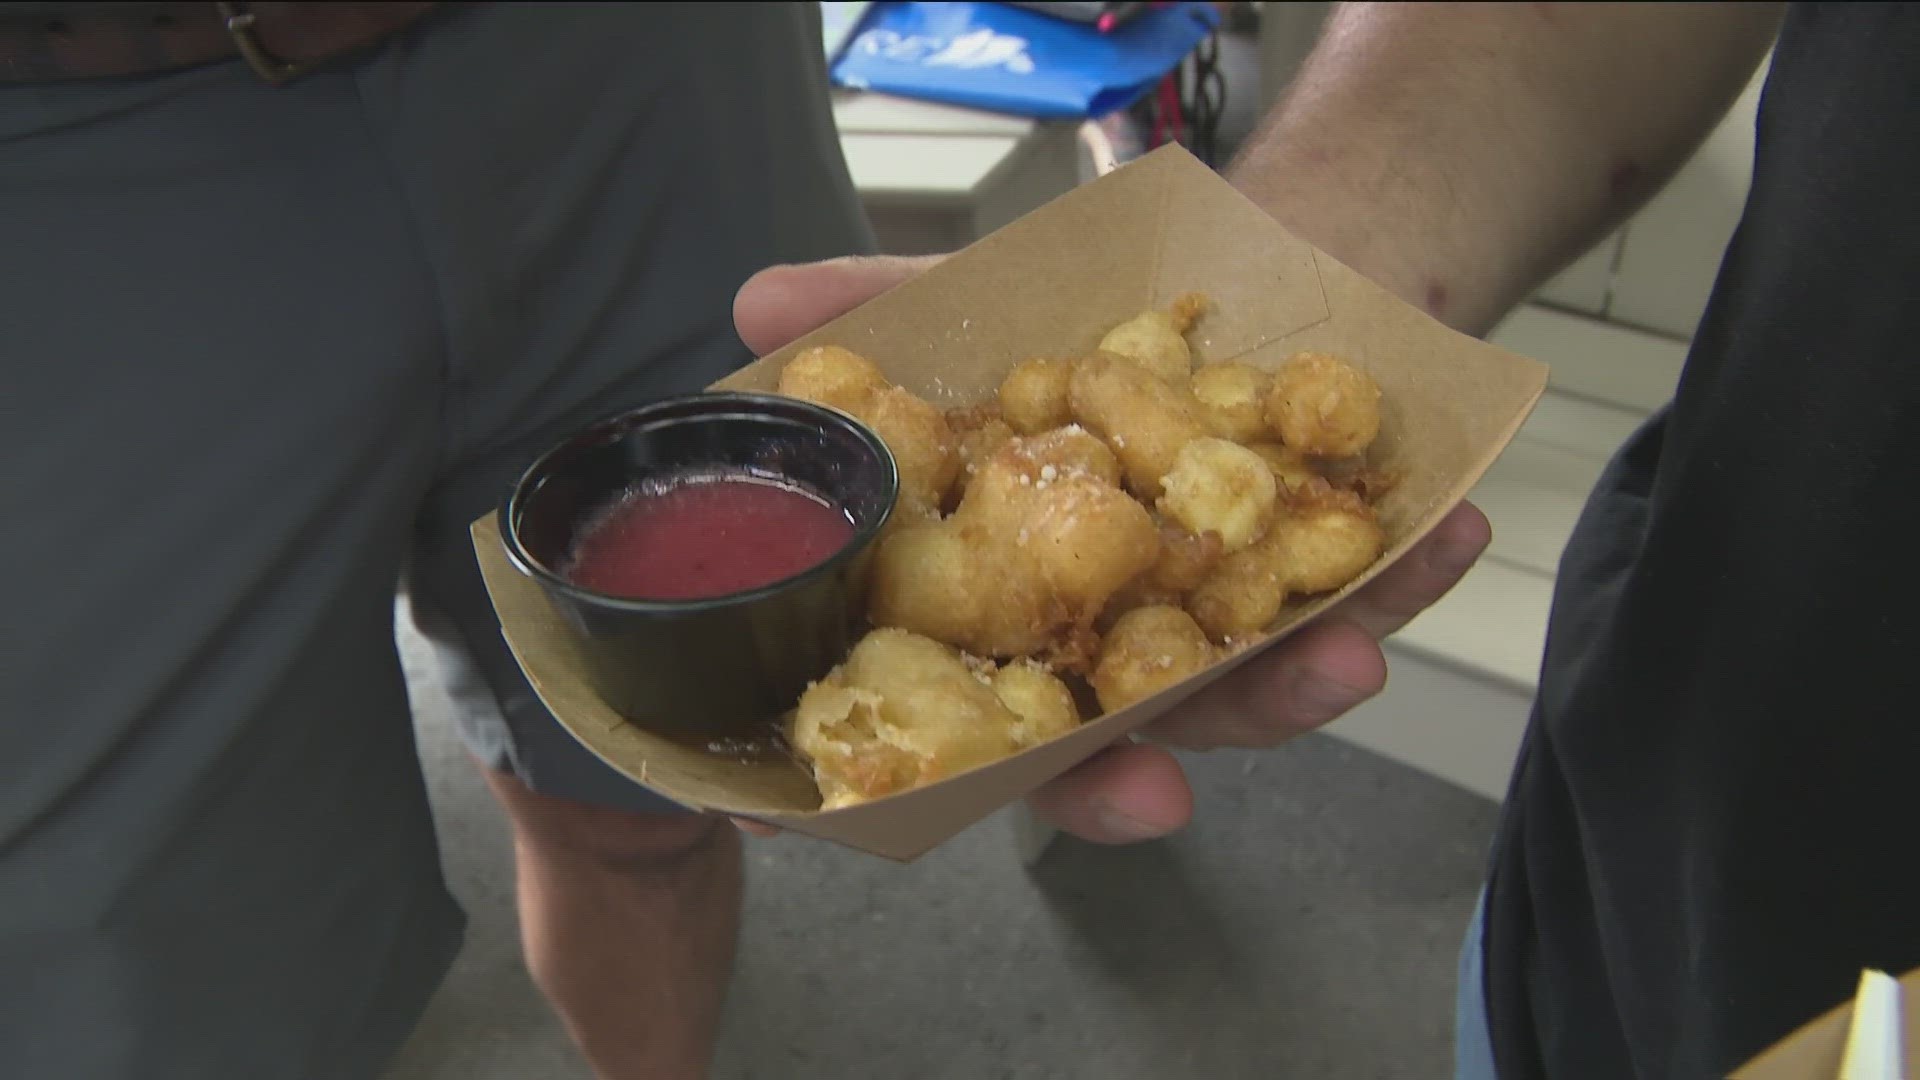 Cheesecake Curds, Fruity Cereal Milk Biscuits and "Not Your Madre's Biscuits & Gravy" are all on the State Fair menu.